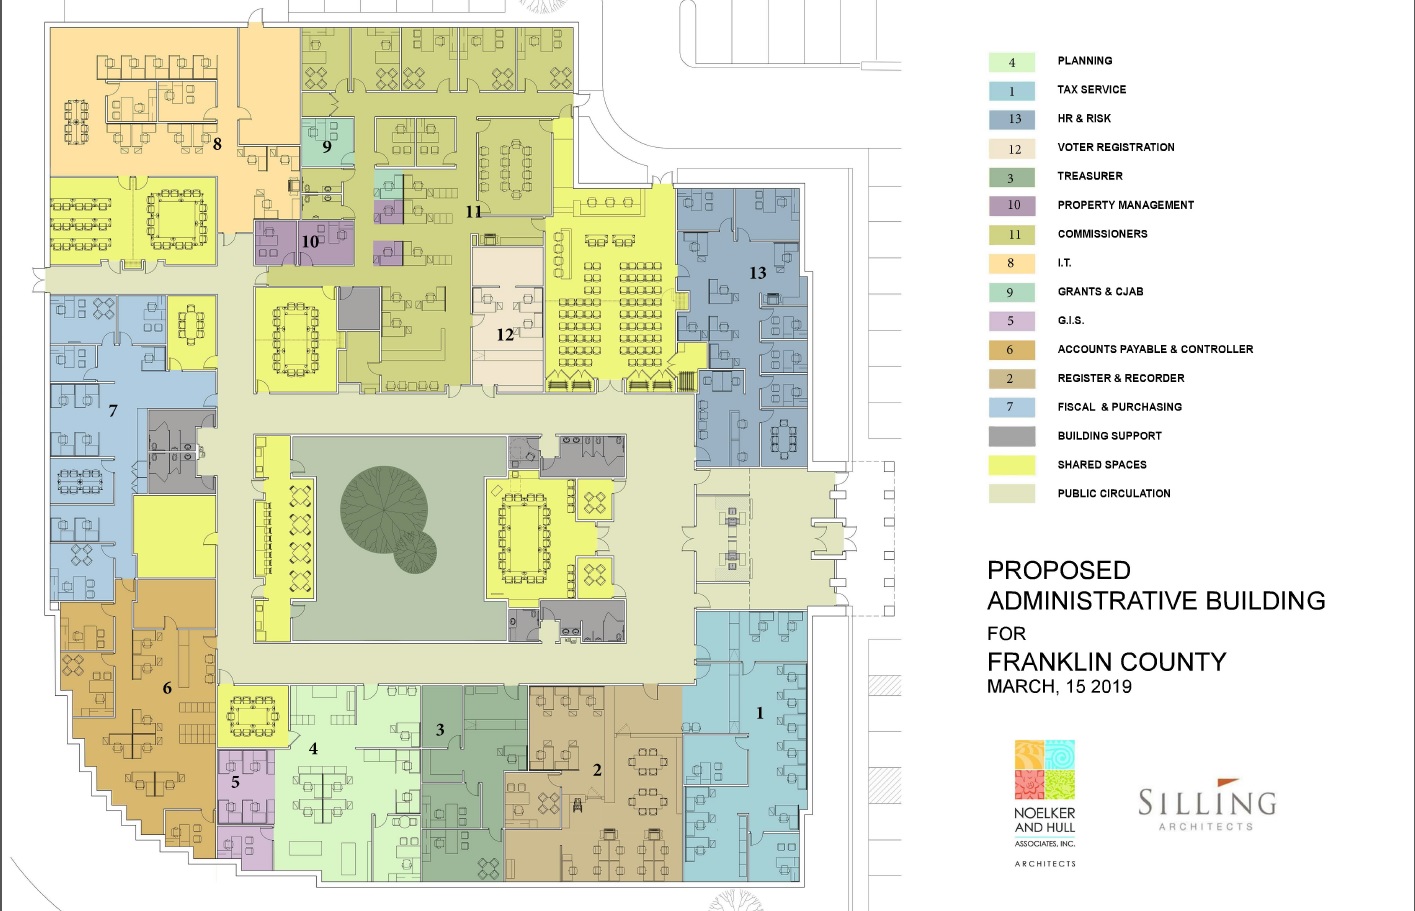 Floor plans for the future Franklin County Administration Building.